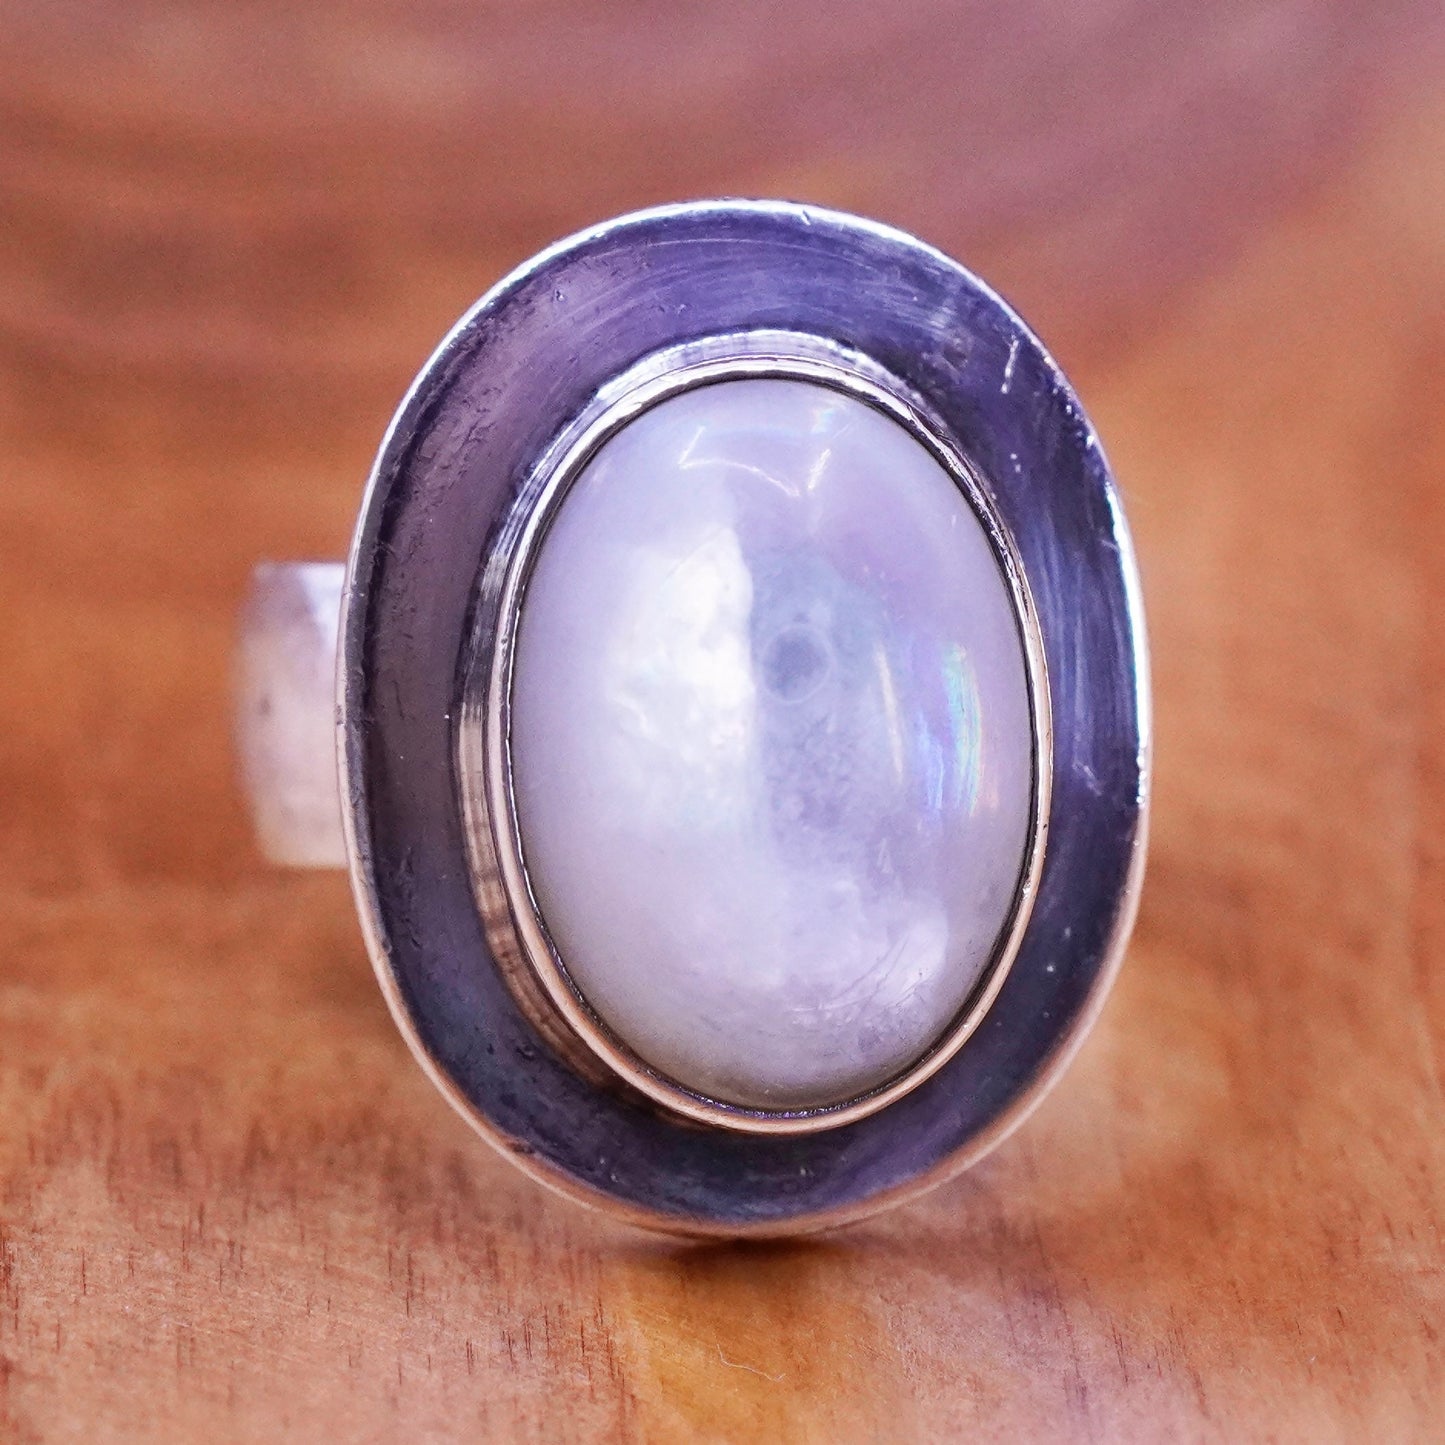 Size 9.25, vintage sterling 925 silver handmade ring with oval moonstone